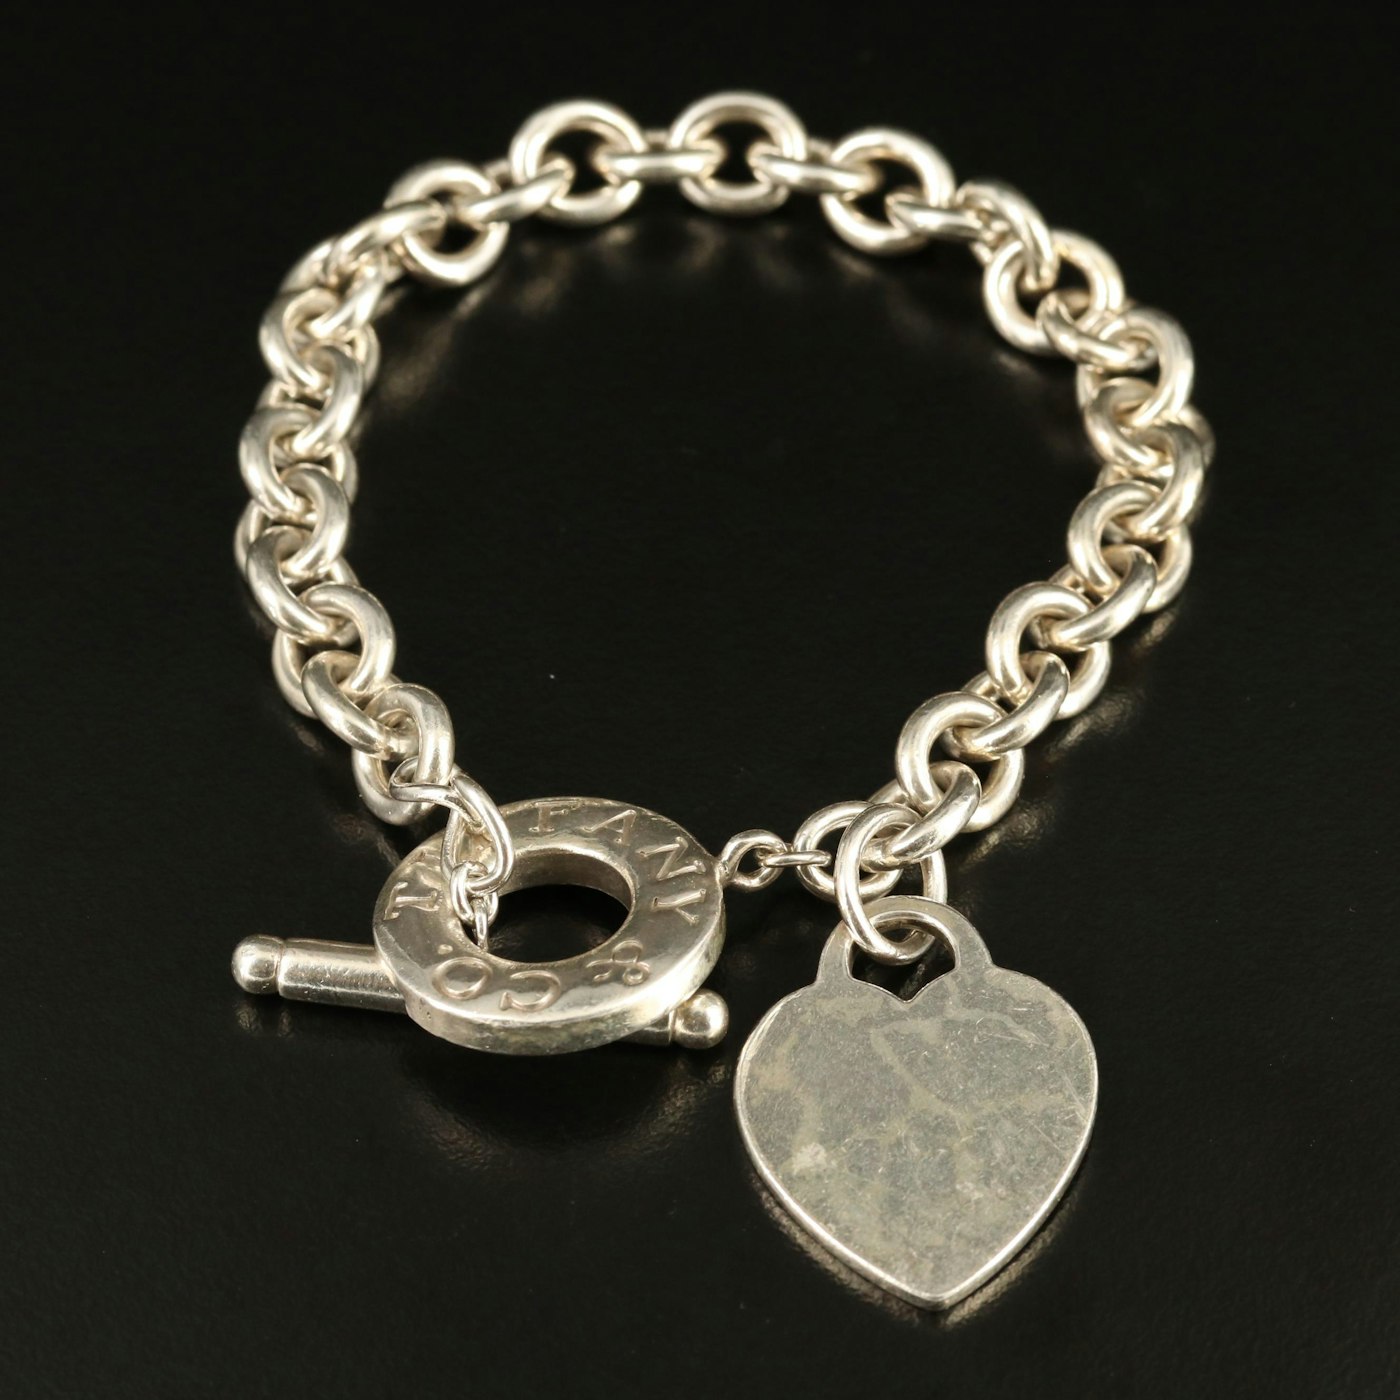 Tiffany & Co. Sterling Silver Toggle Bracelet with Heart Tag | EBTH